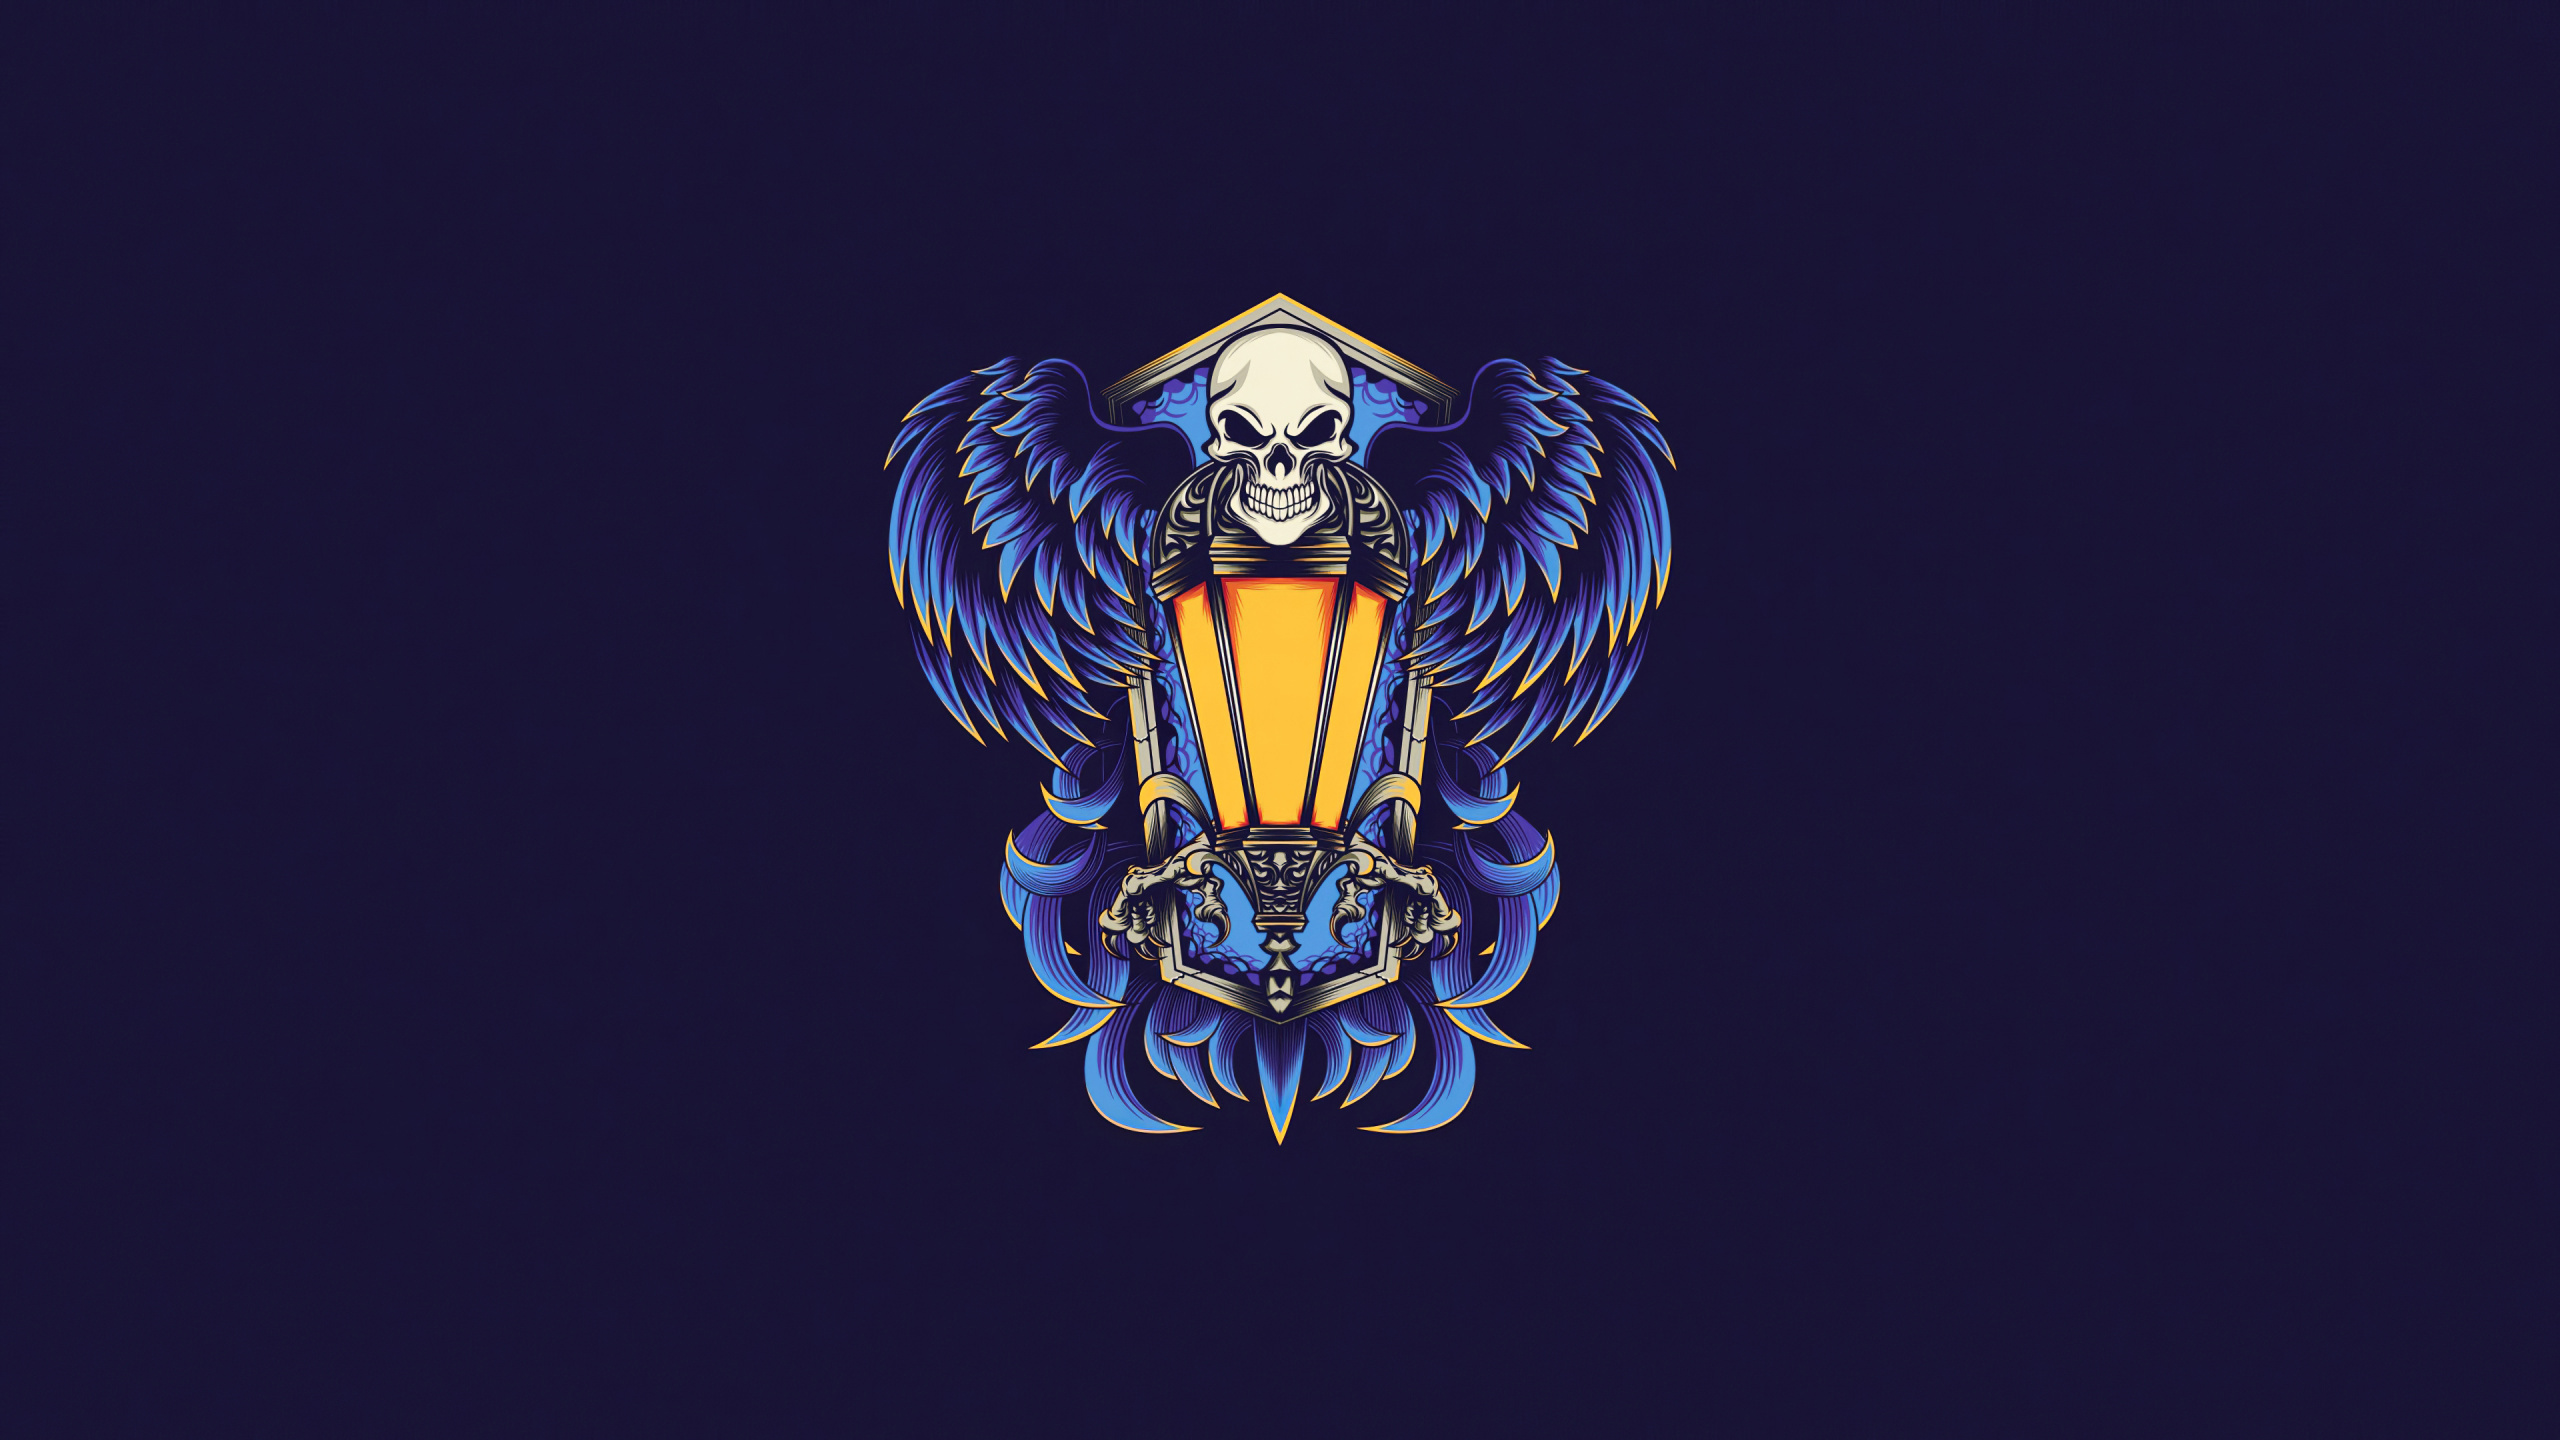 Gold and Blue Dragon Logo. Wallpaper in 2560x1440 Resolution